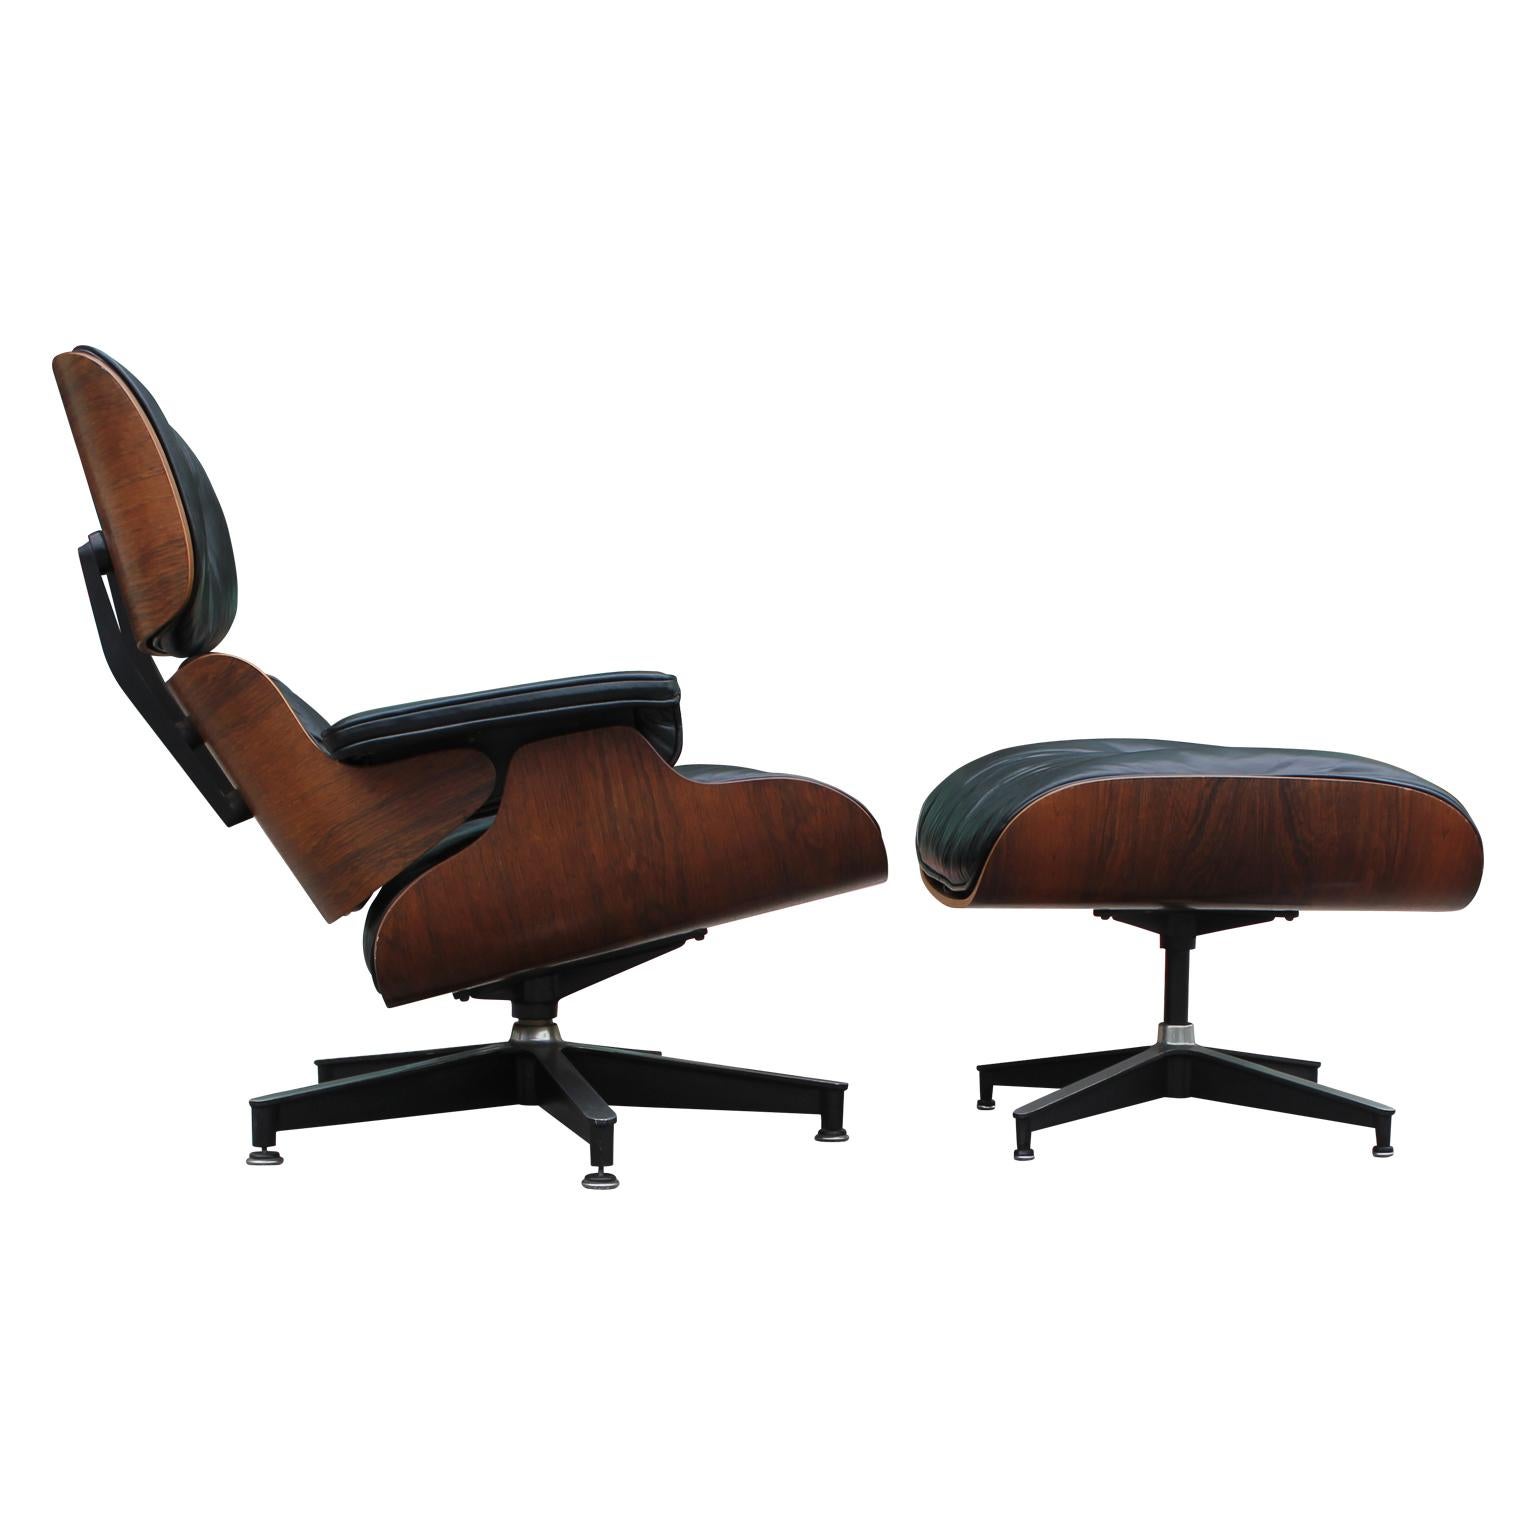 American Modern Black Leather and Rosewood Herman Miller Eames Lounge Chair and Ottoman